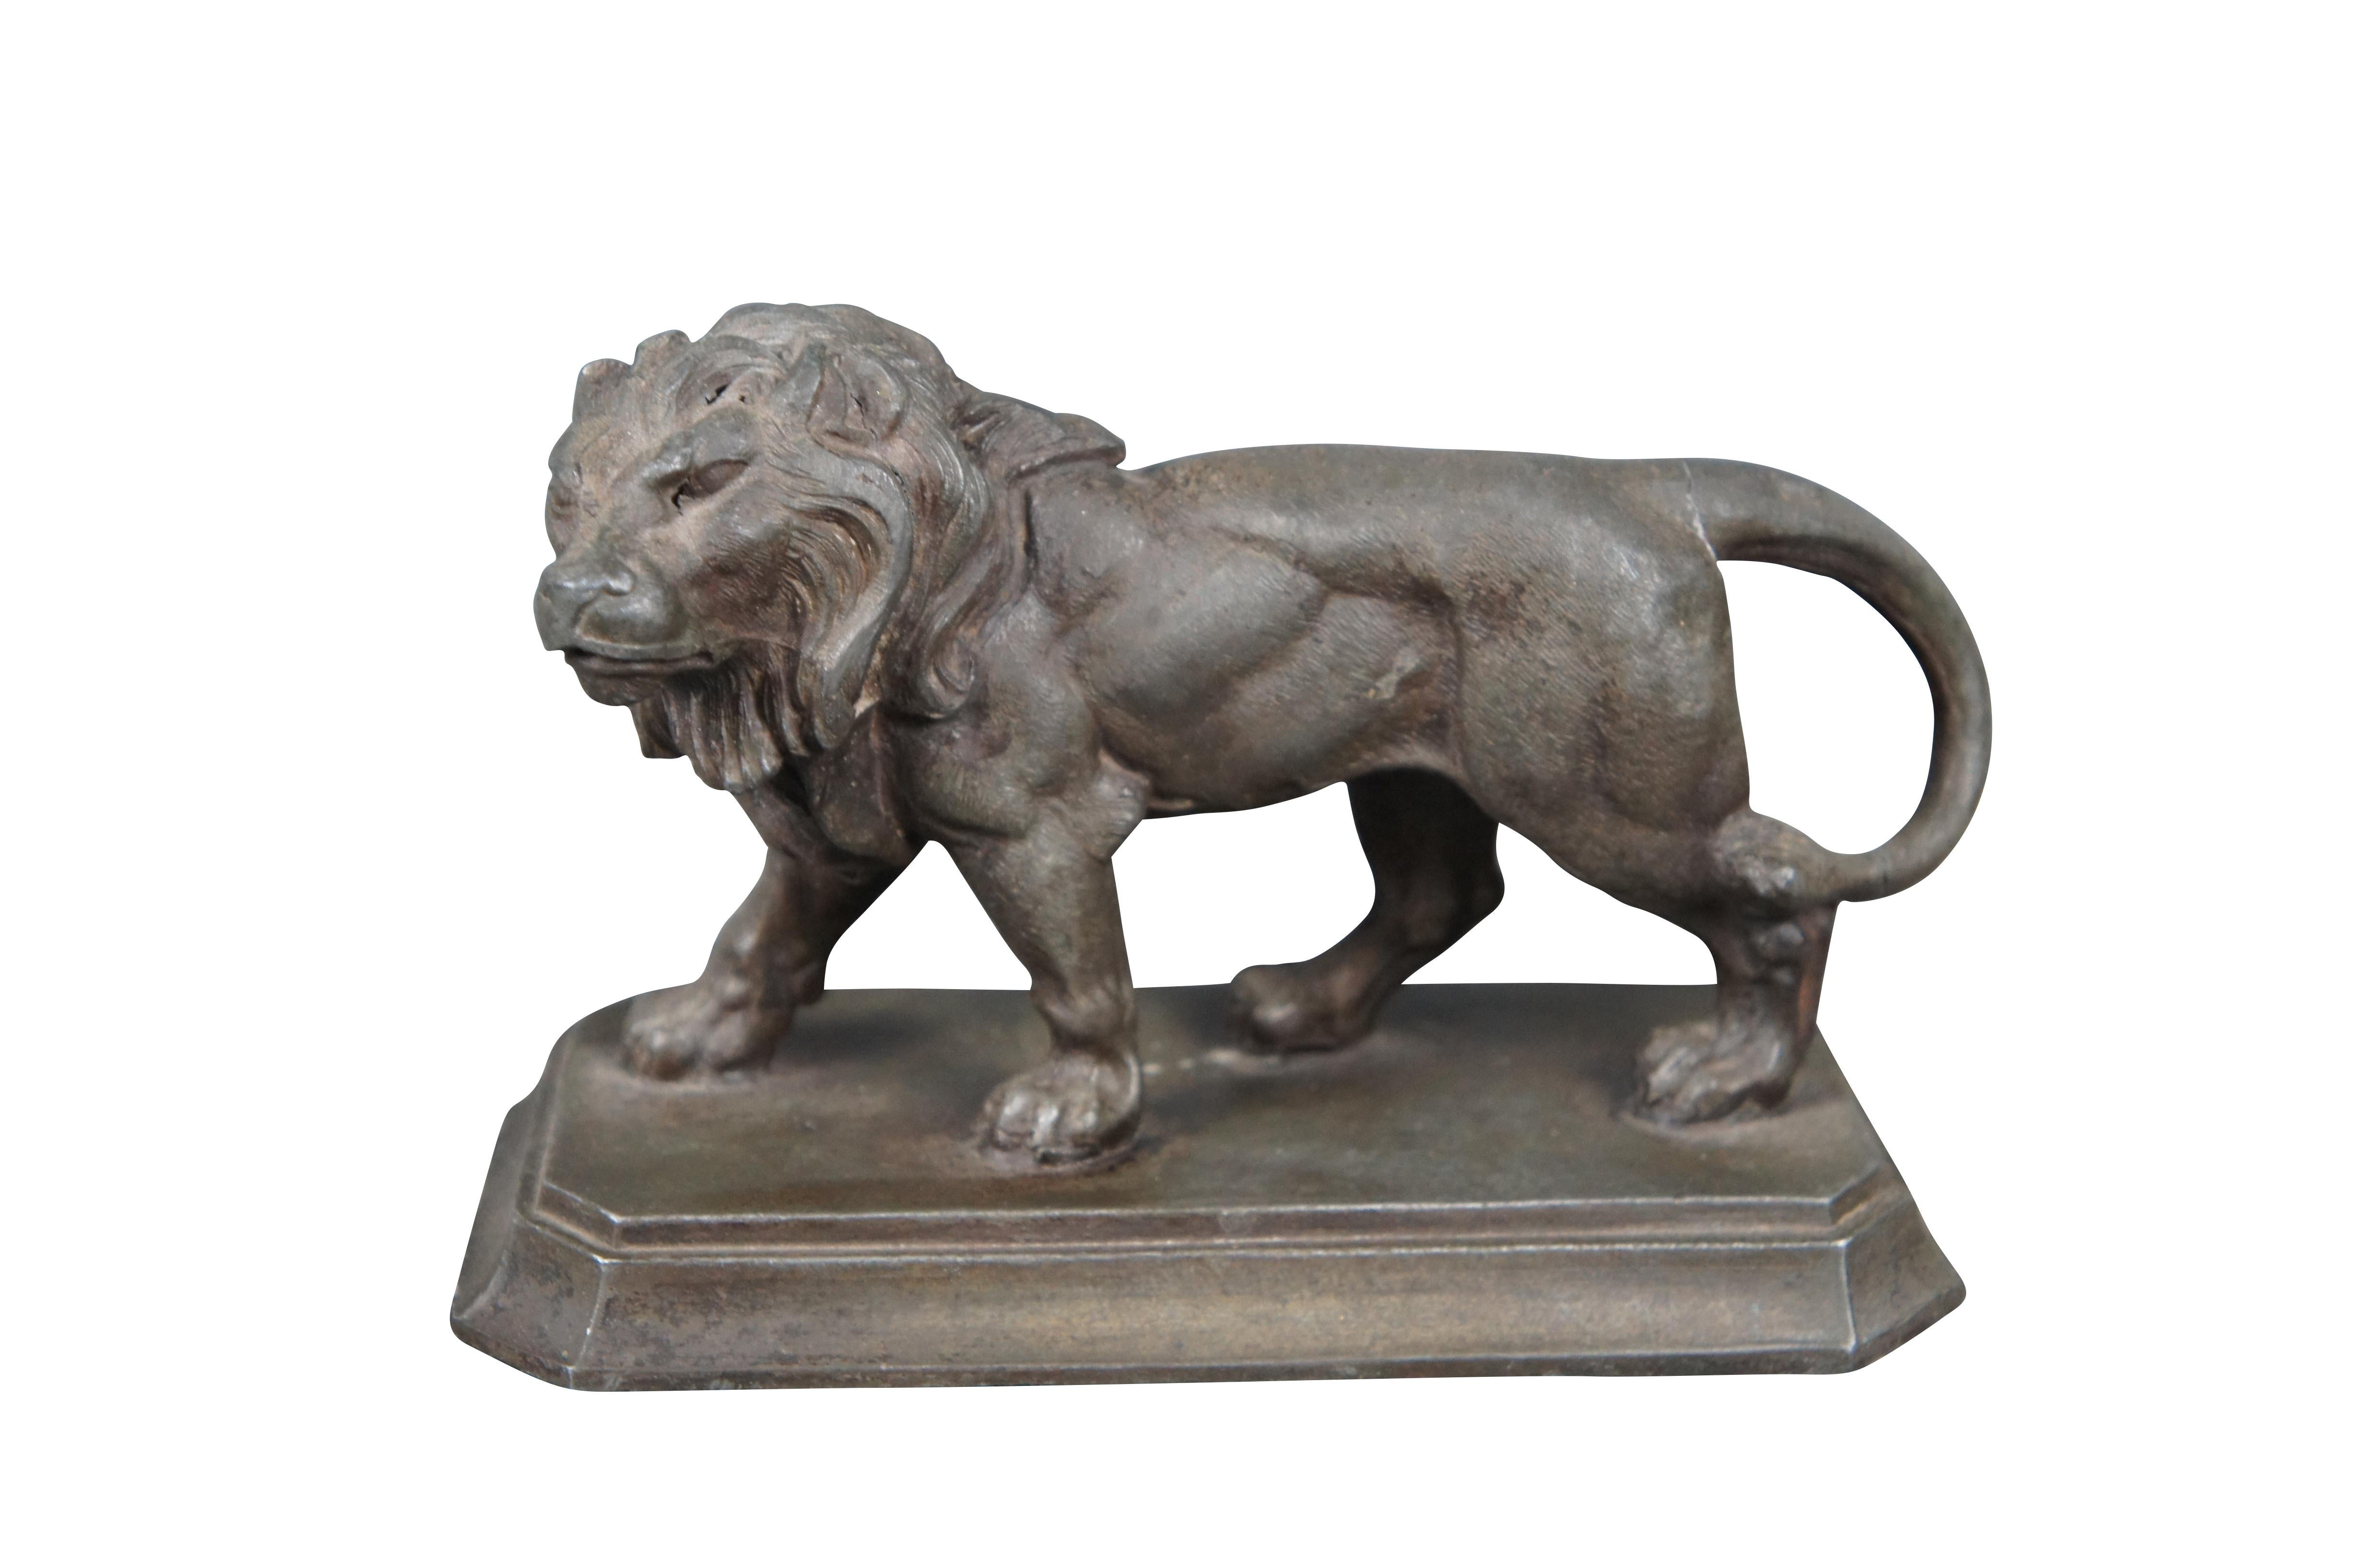 Pair of vintage Spelter lion sculptures in the manner of Valton. Each is on a plinth in a prowling stance

Dimensions:
5 3/4